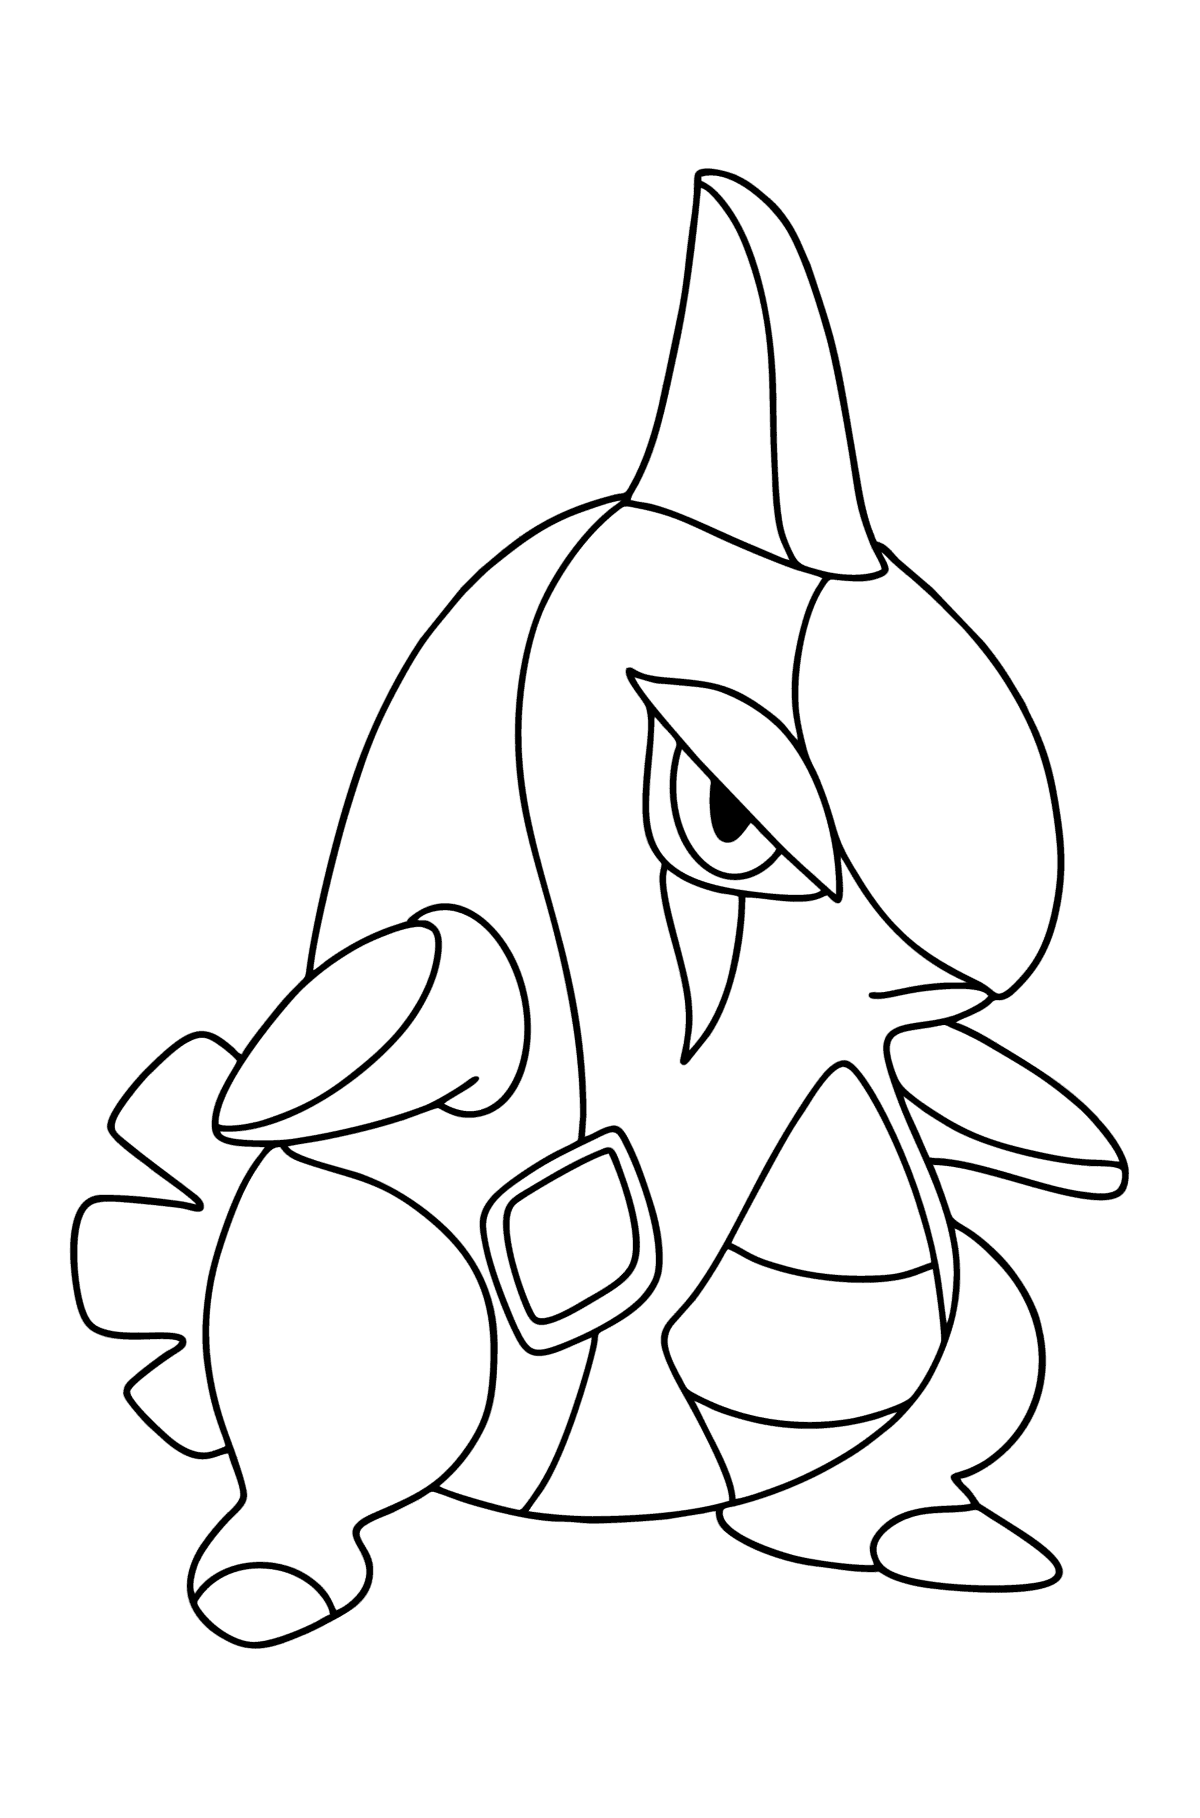 Colouring page Pokémon X and Y Larvitar - Coloring Pages for Kids